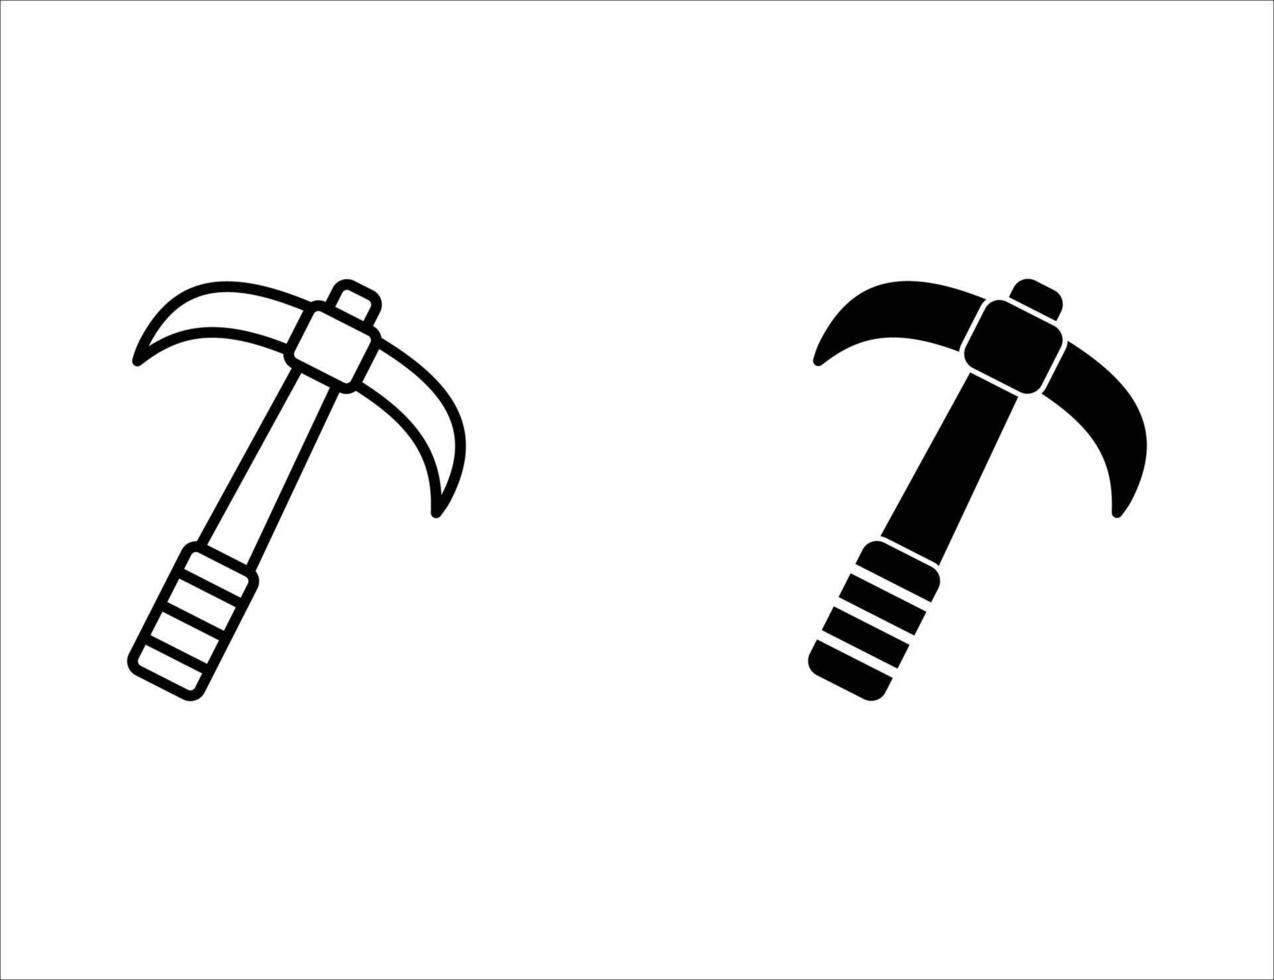 pickaxe icon. outline icon and solid icon vector